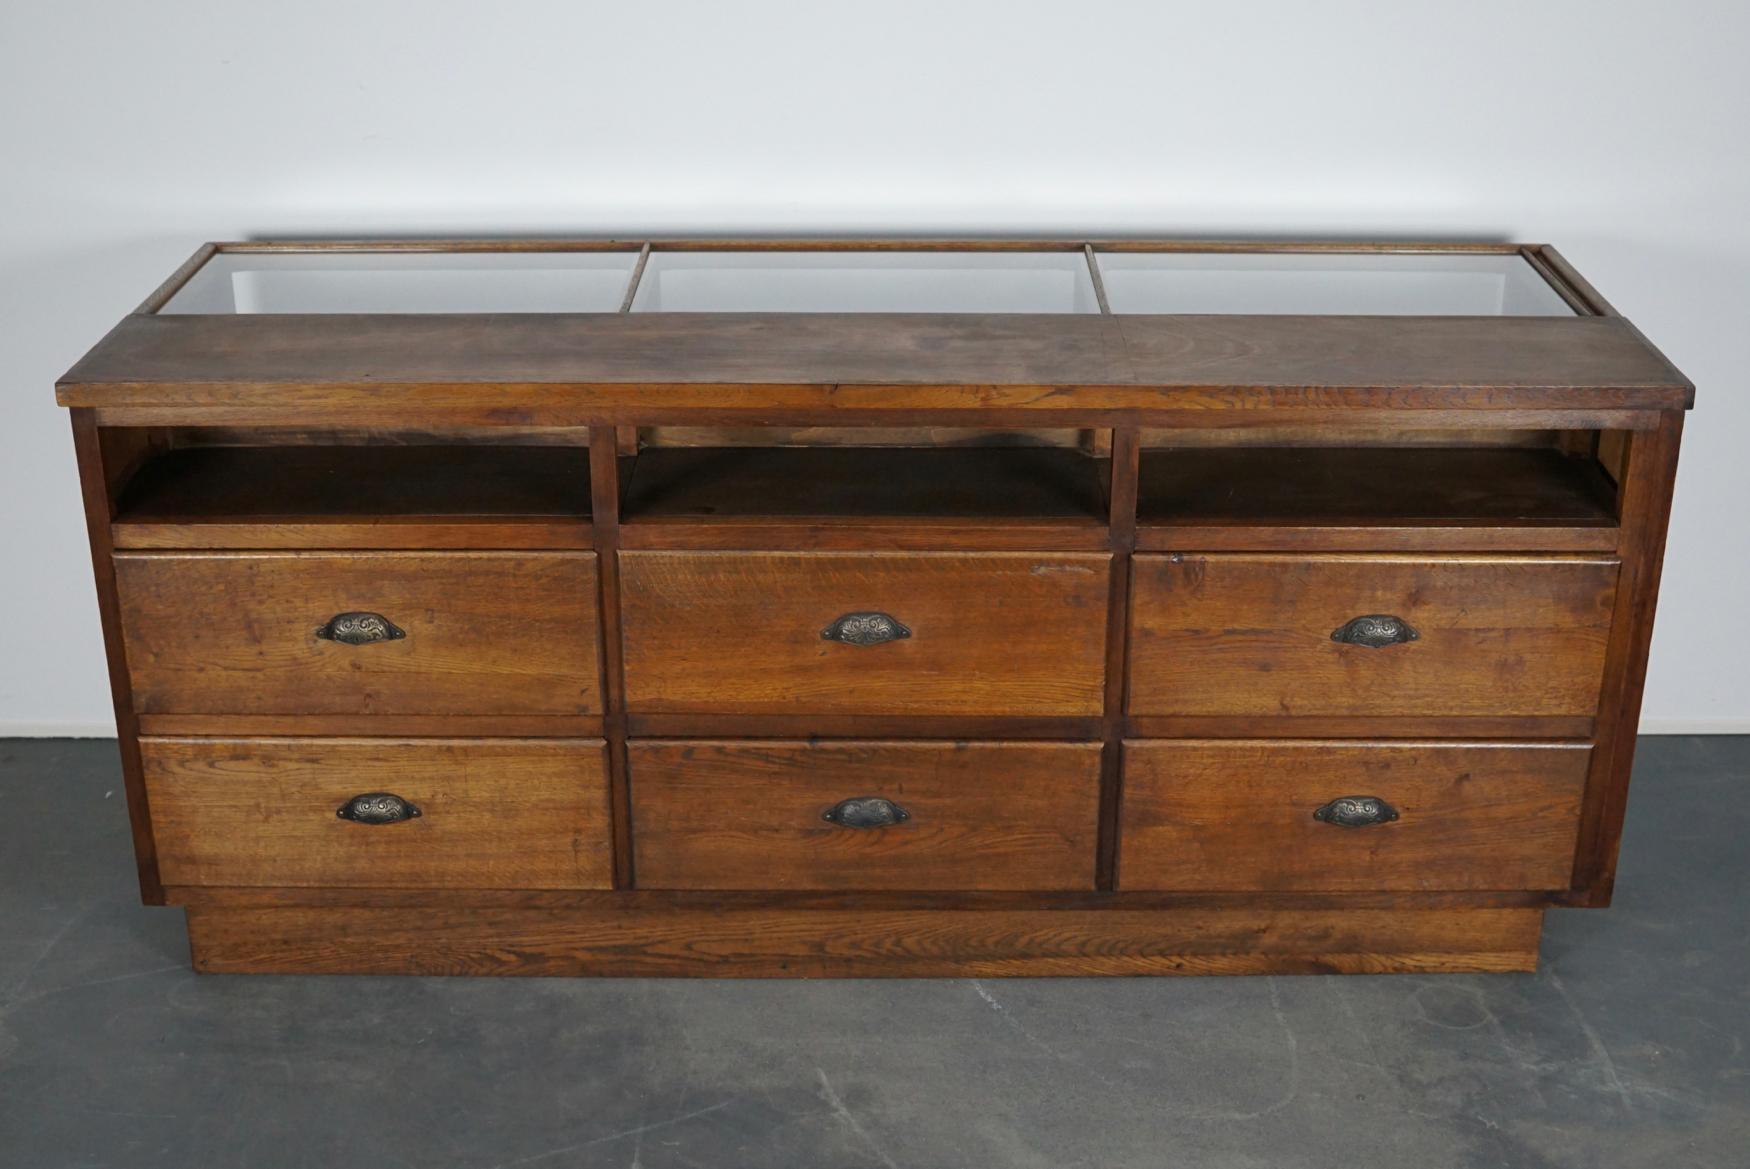 This vintage oak haberdashery shop counter dates from the 1930s and was made in France. It features a solid wooden frame and drawers in oak with brass handles.